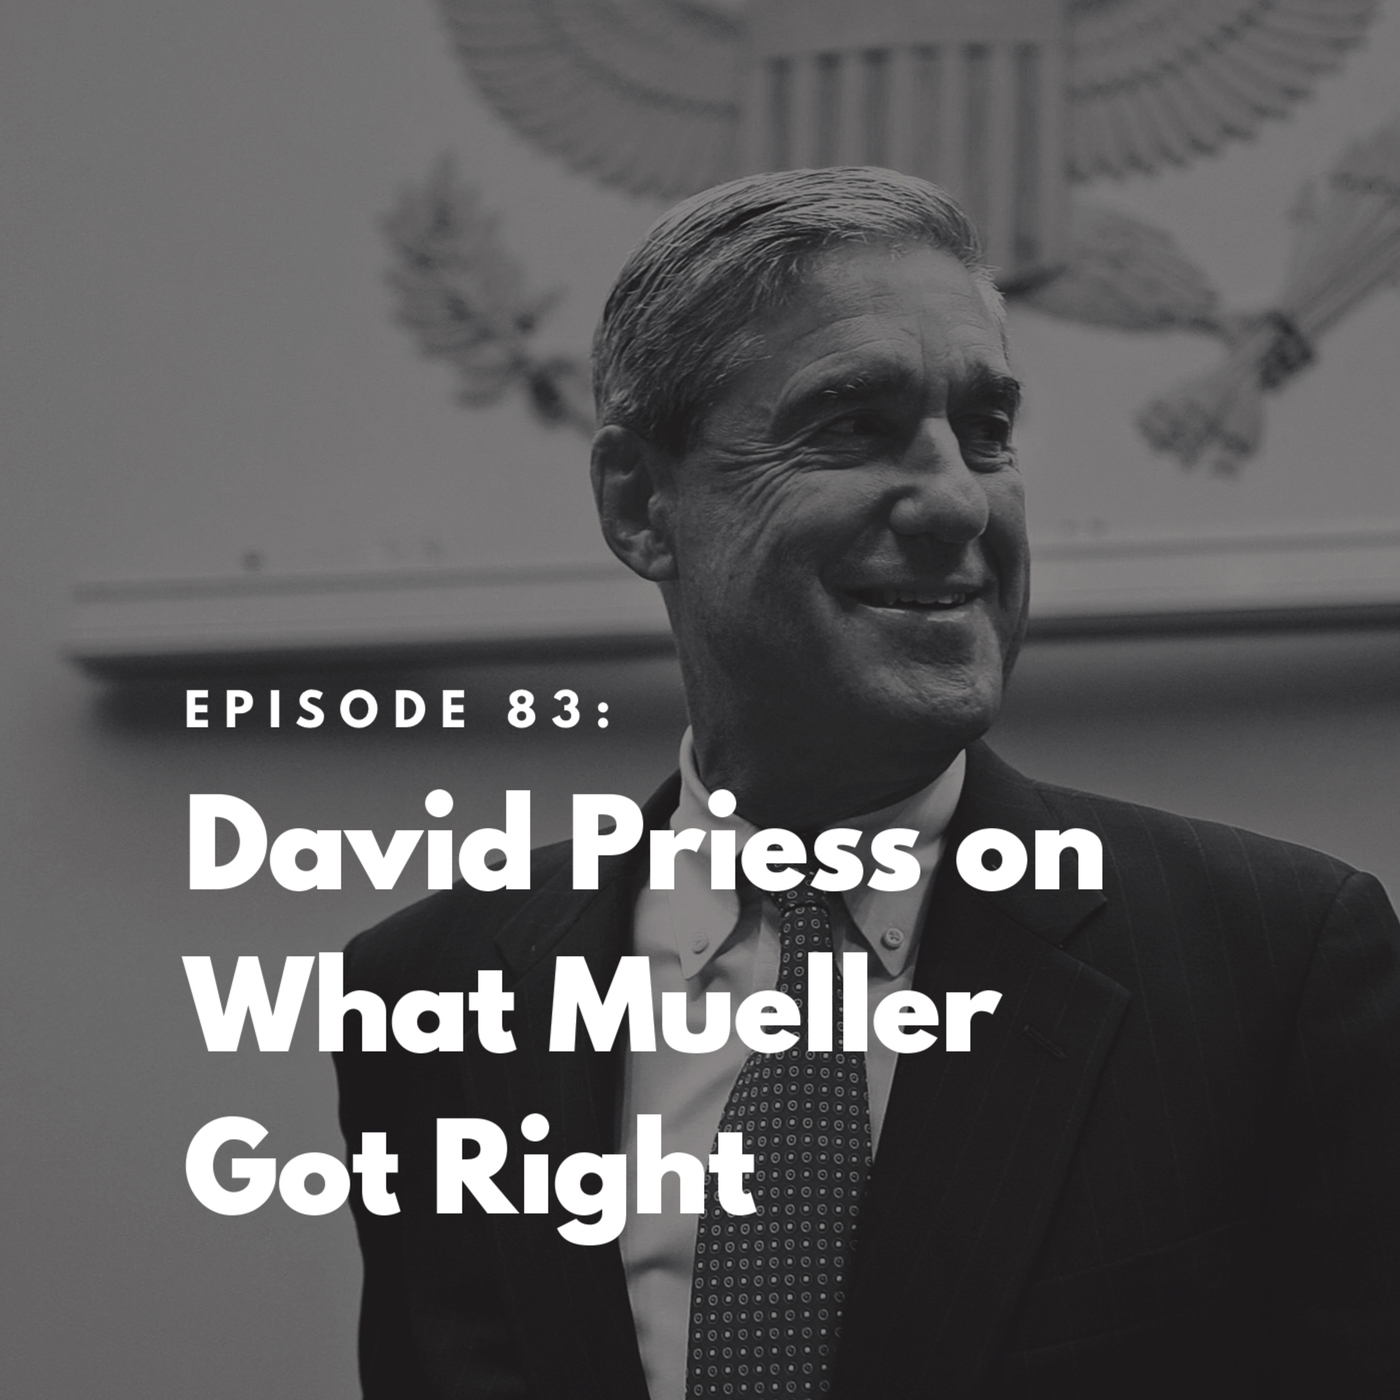 david priess how to get rid of a president